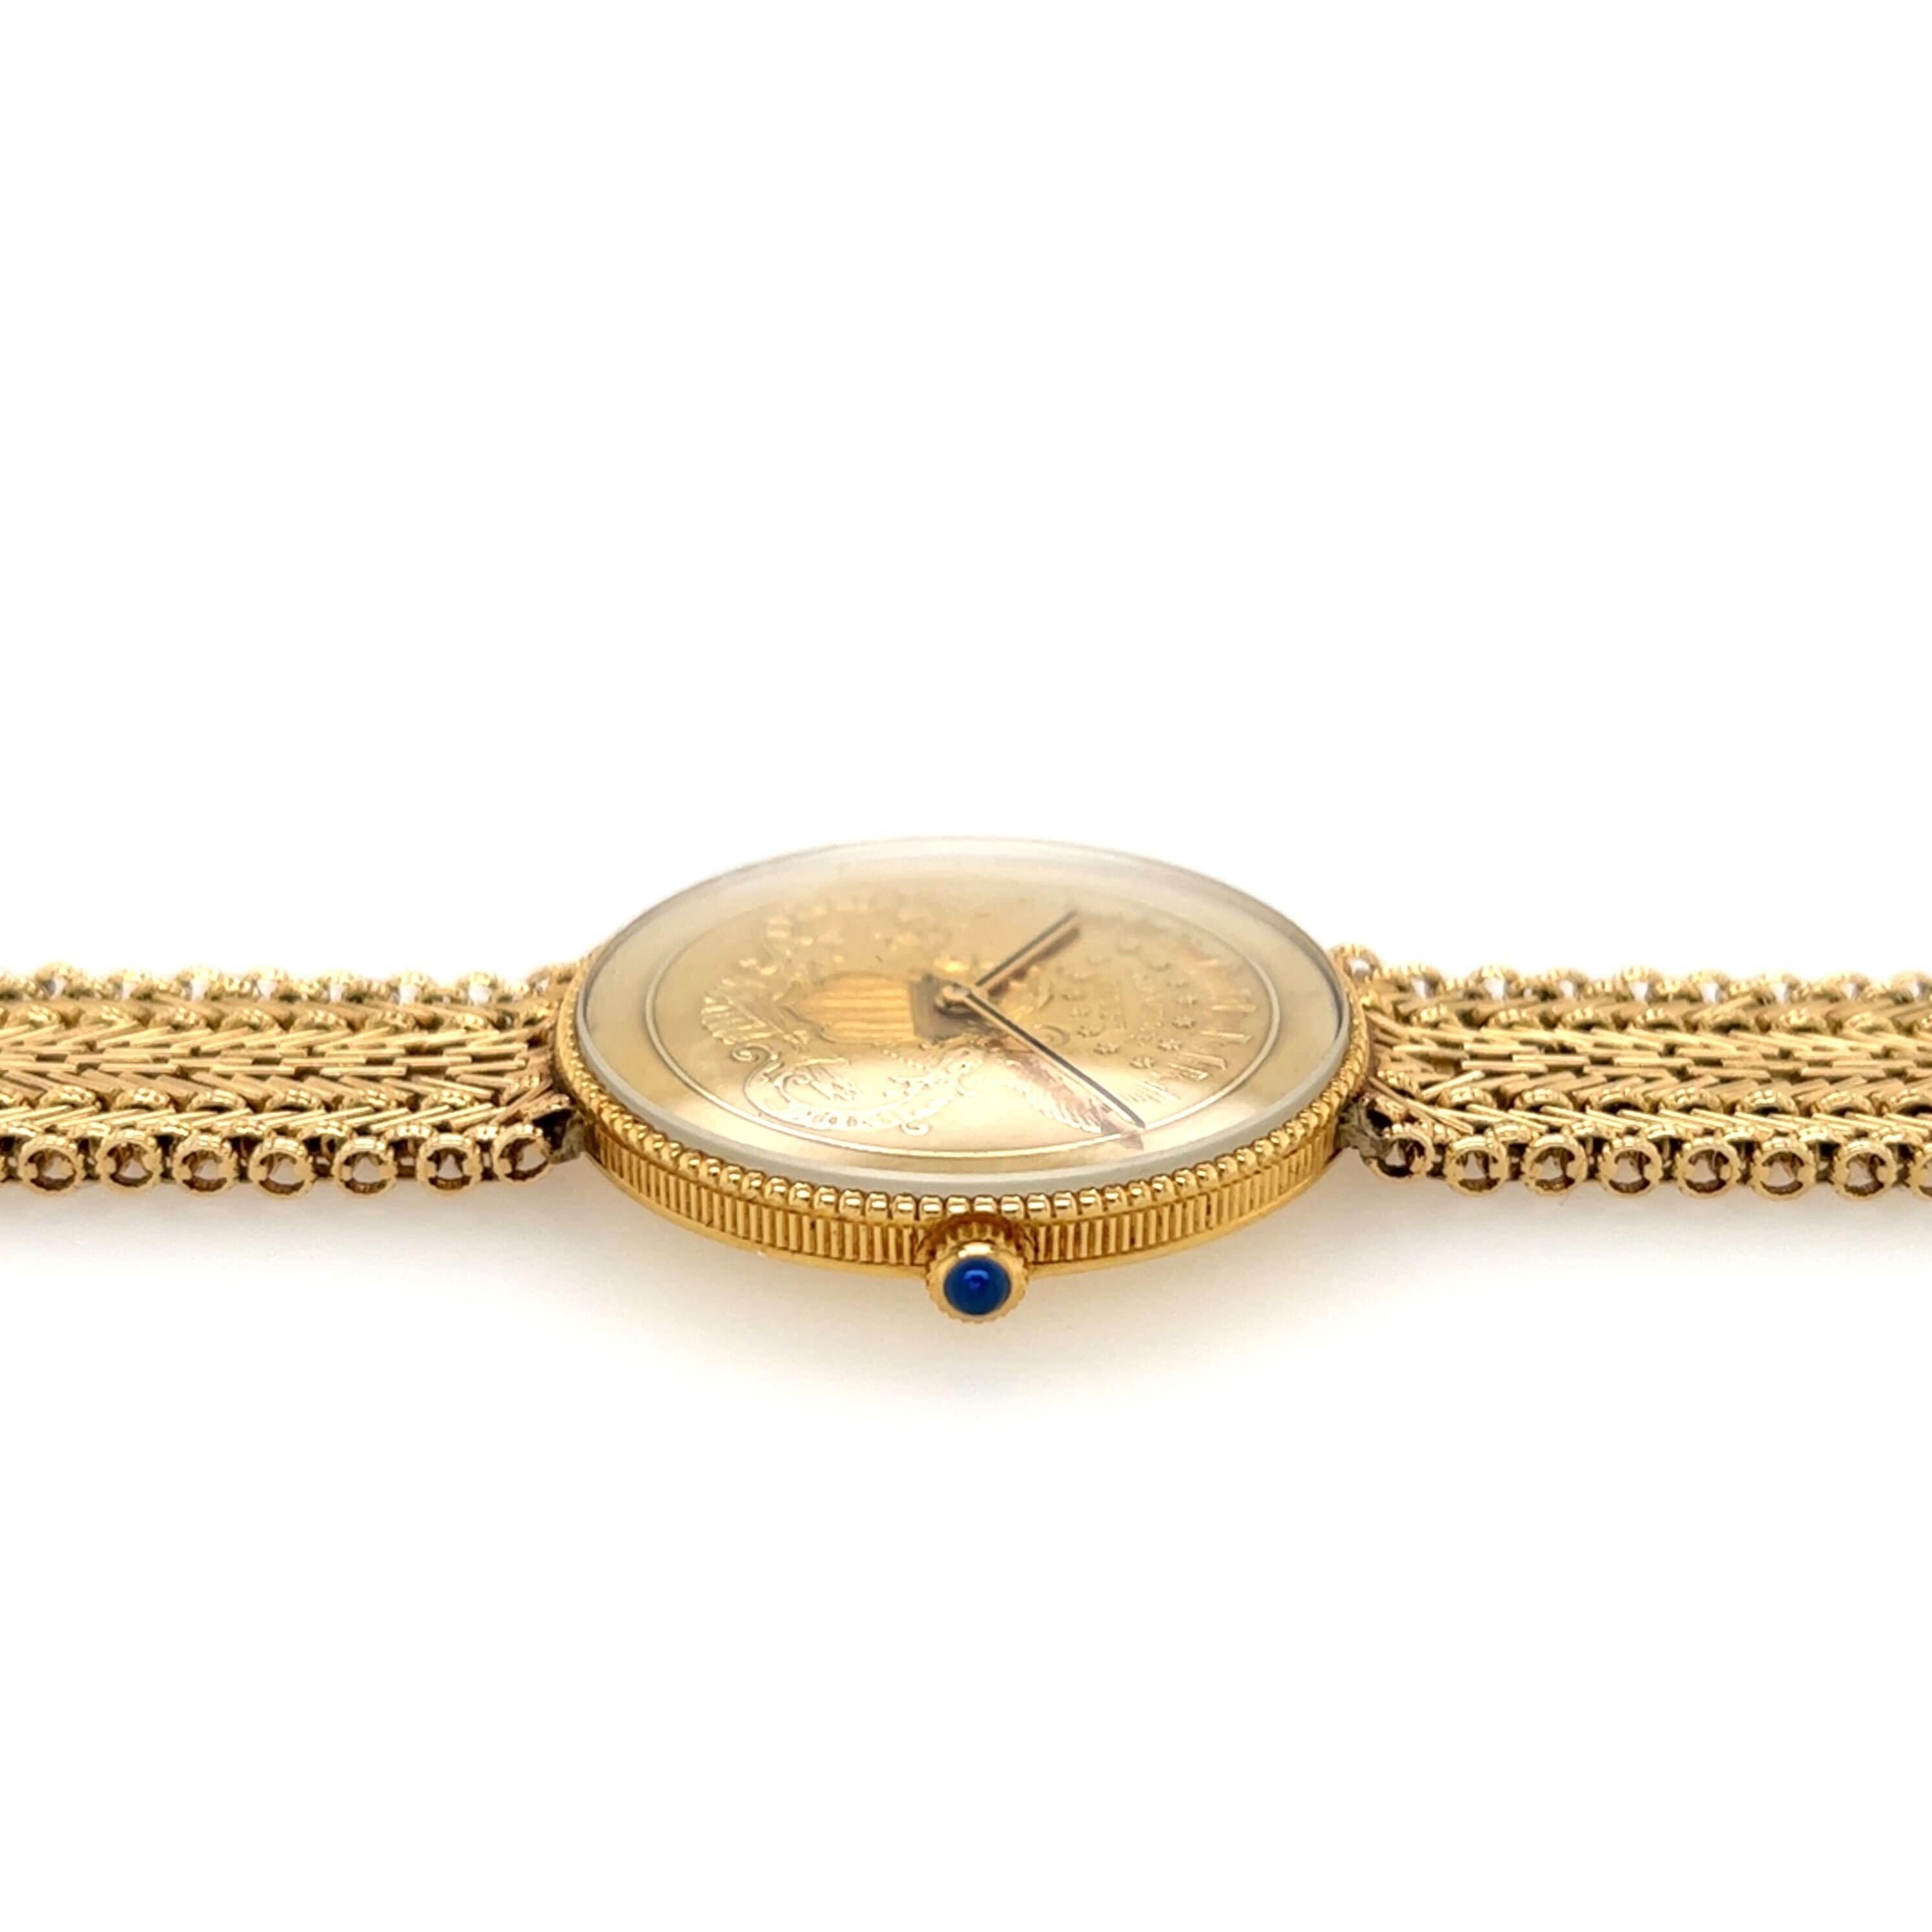 An 18 karat yellow gold watch with 22K karat gold US coin dial a 14 karat yellow gold bracelet.  Of mechanical movement. 32mm, with textured gold bezel and blued stone set crown. Length is approximately 7 inches (adjustable), gross weight is